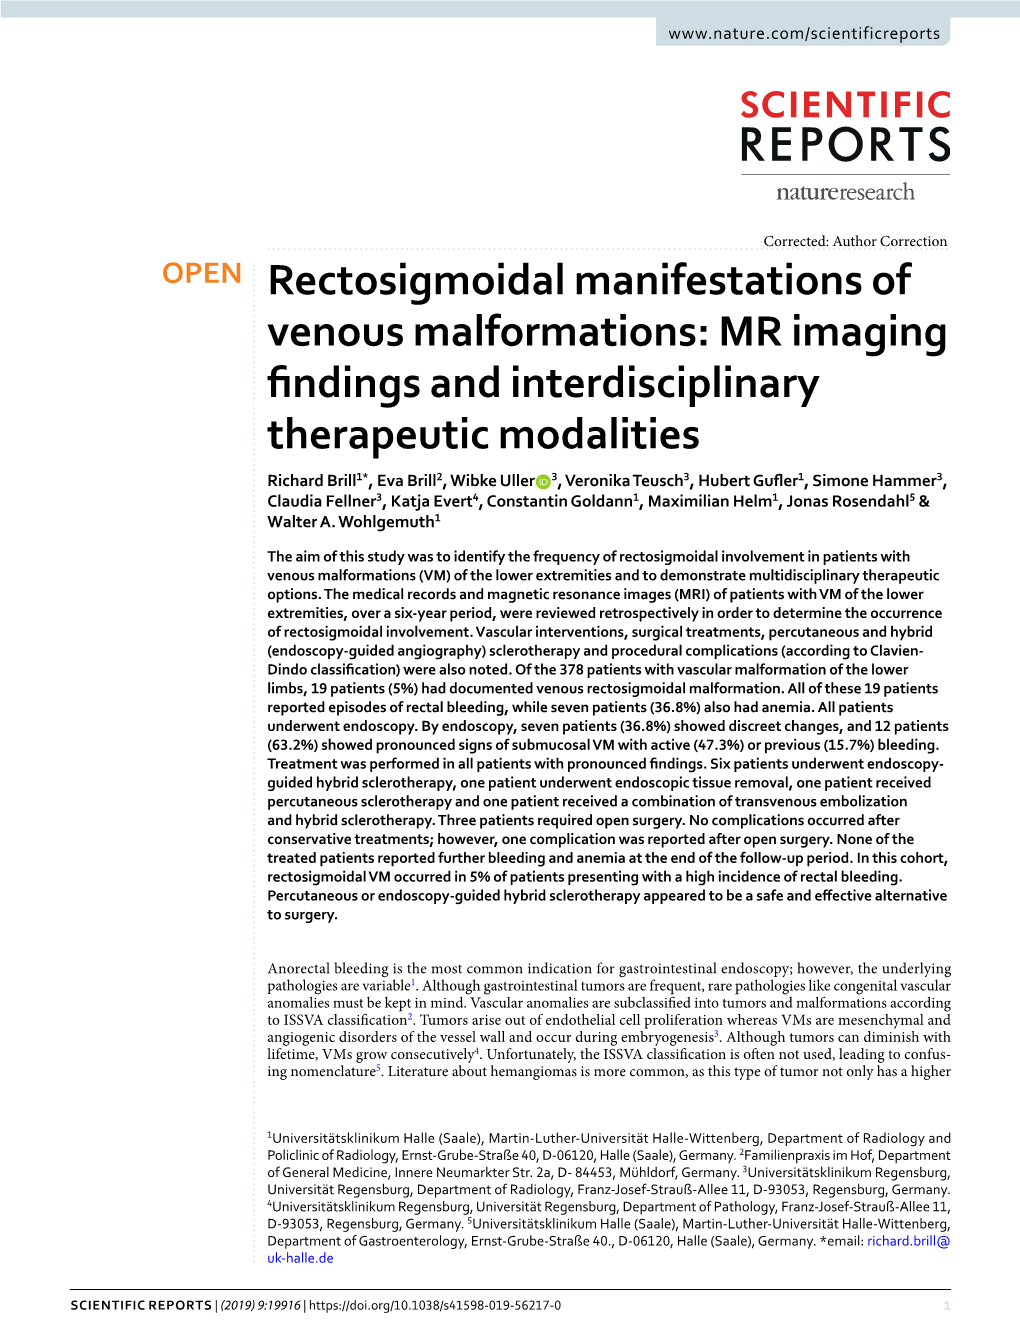 Rectosigmoidal Manifestations of Venous Malformations: MR Imaging Findings and Interdisciplinary Therapeutic Modalities